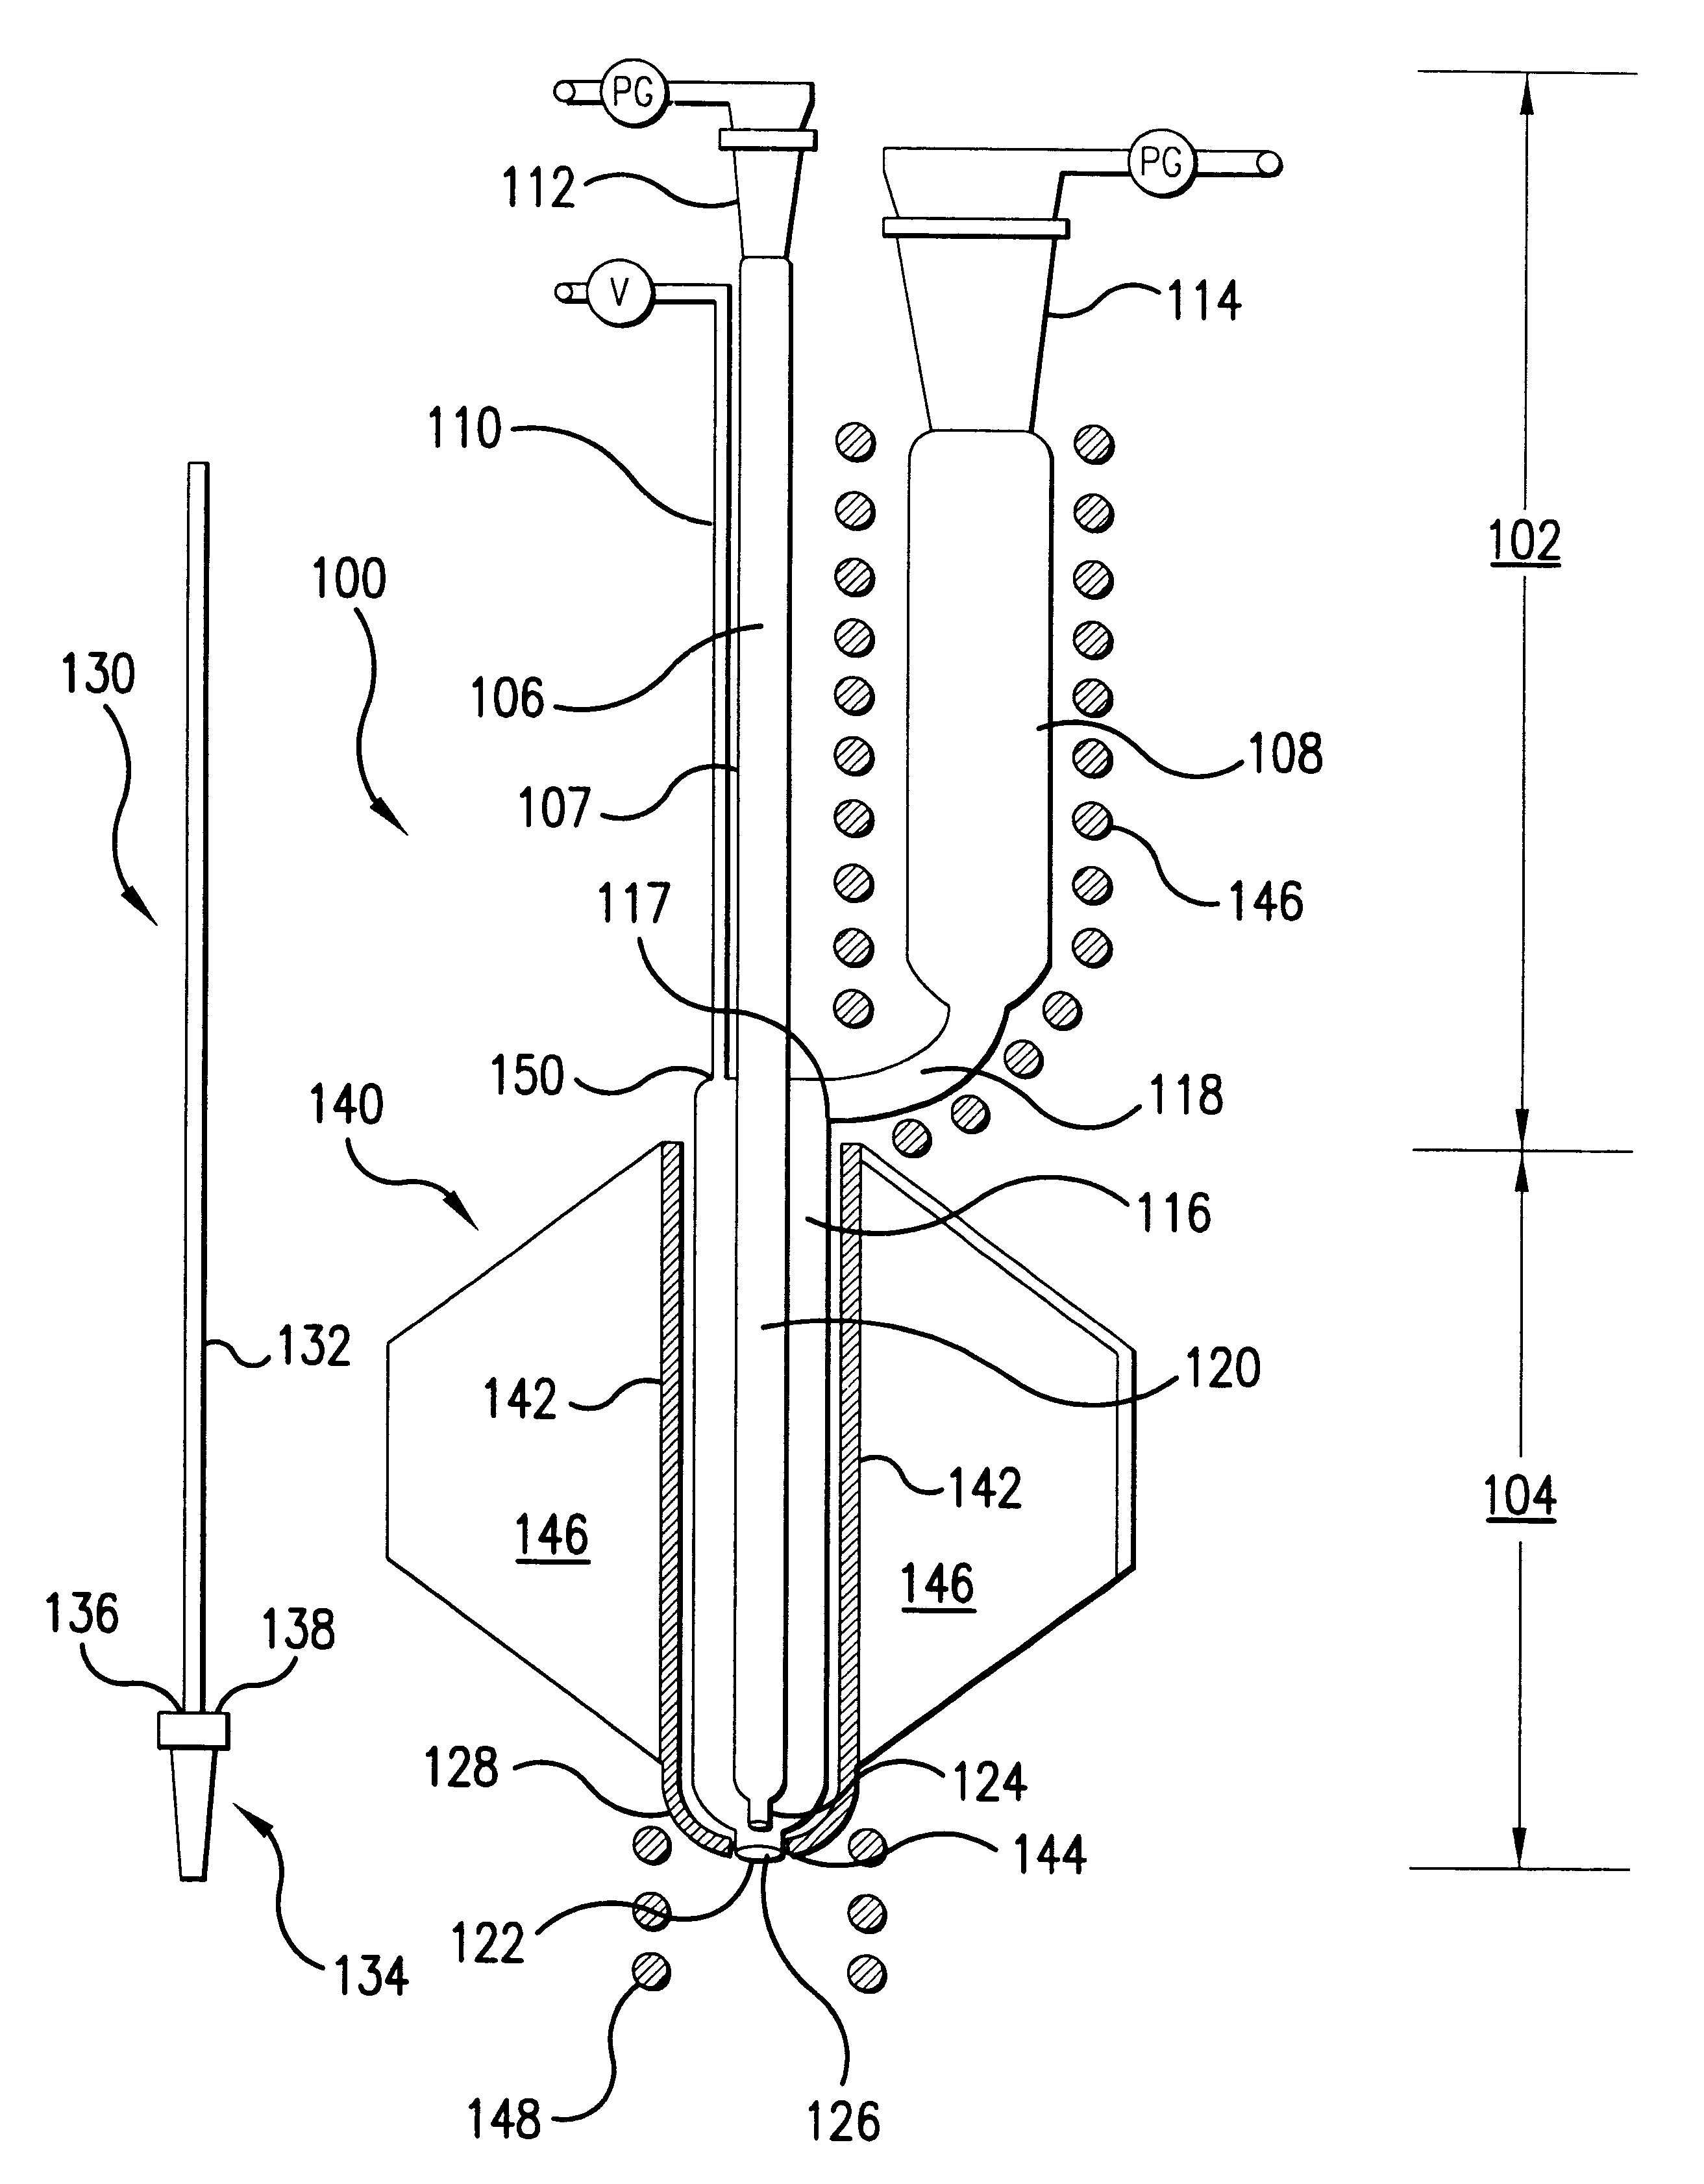 Multi heating zone apparatus and process for making core/clad glass fibers